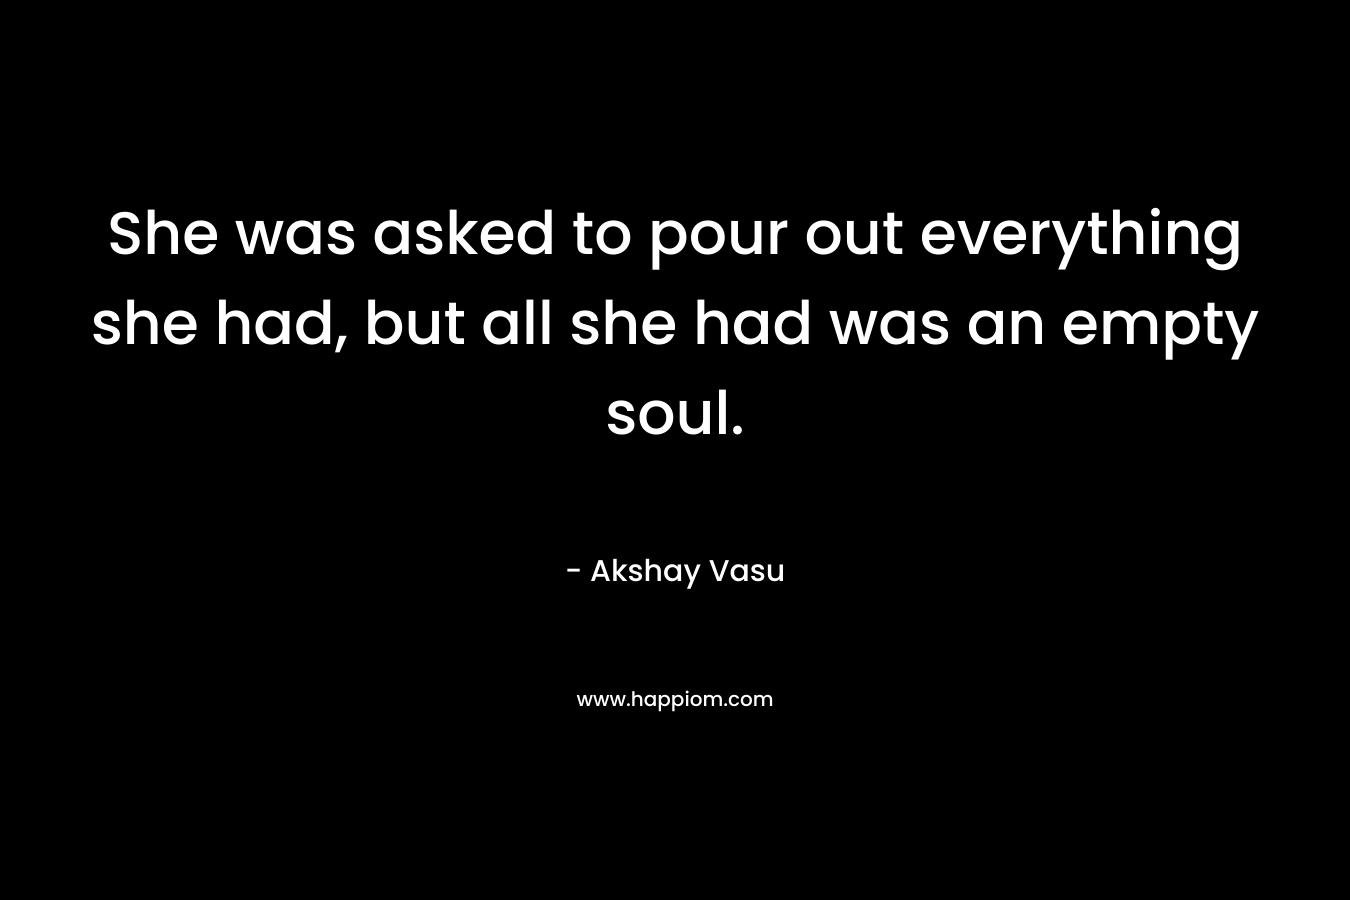 She was asked to pour out everything she had, but all she had was an empty soul.